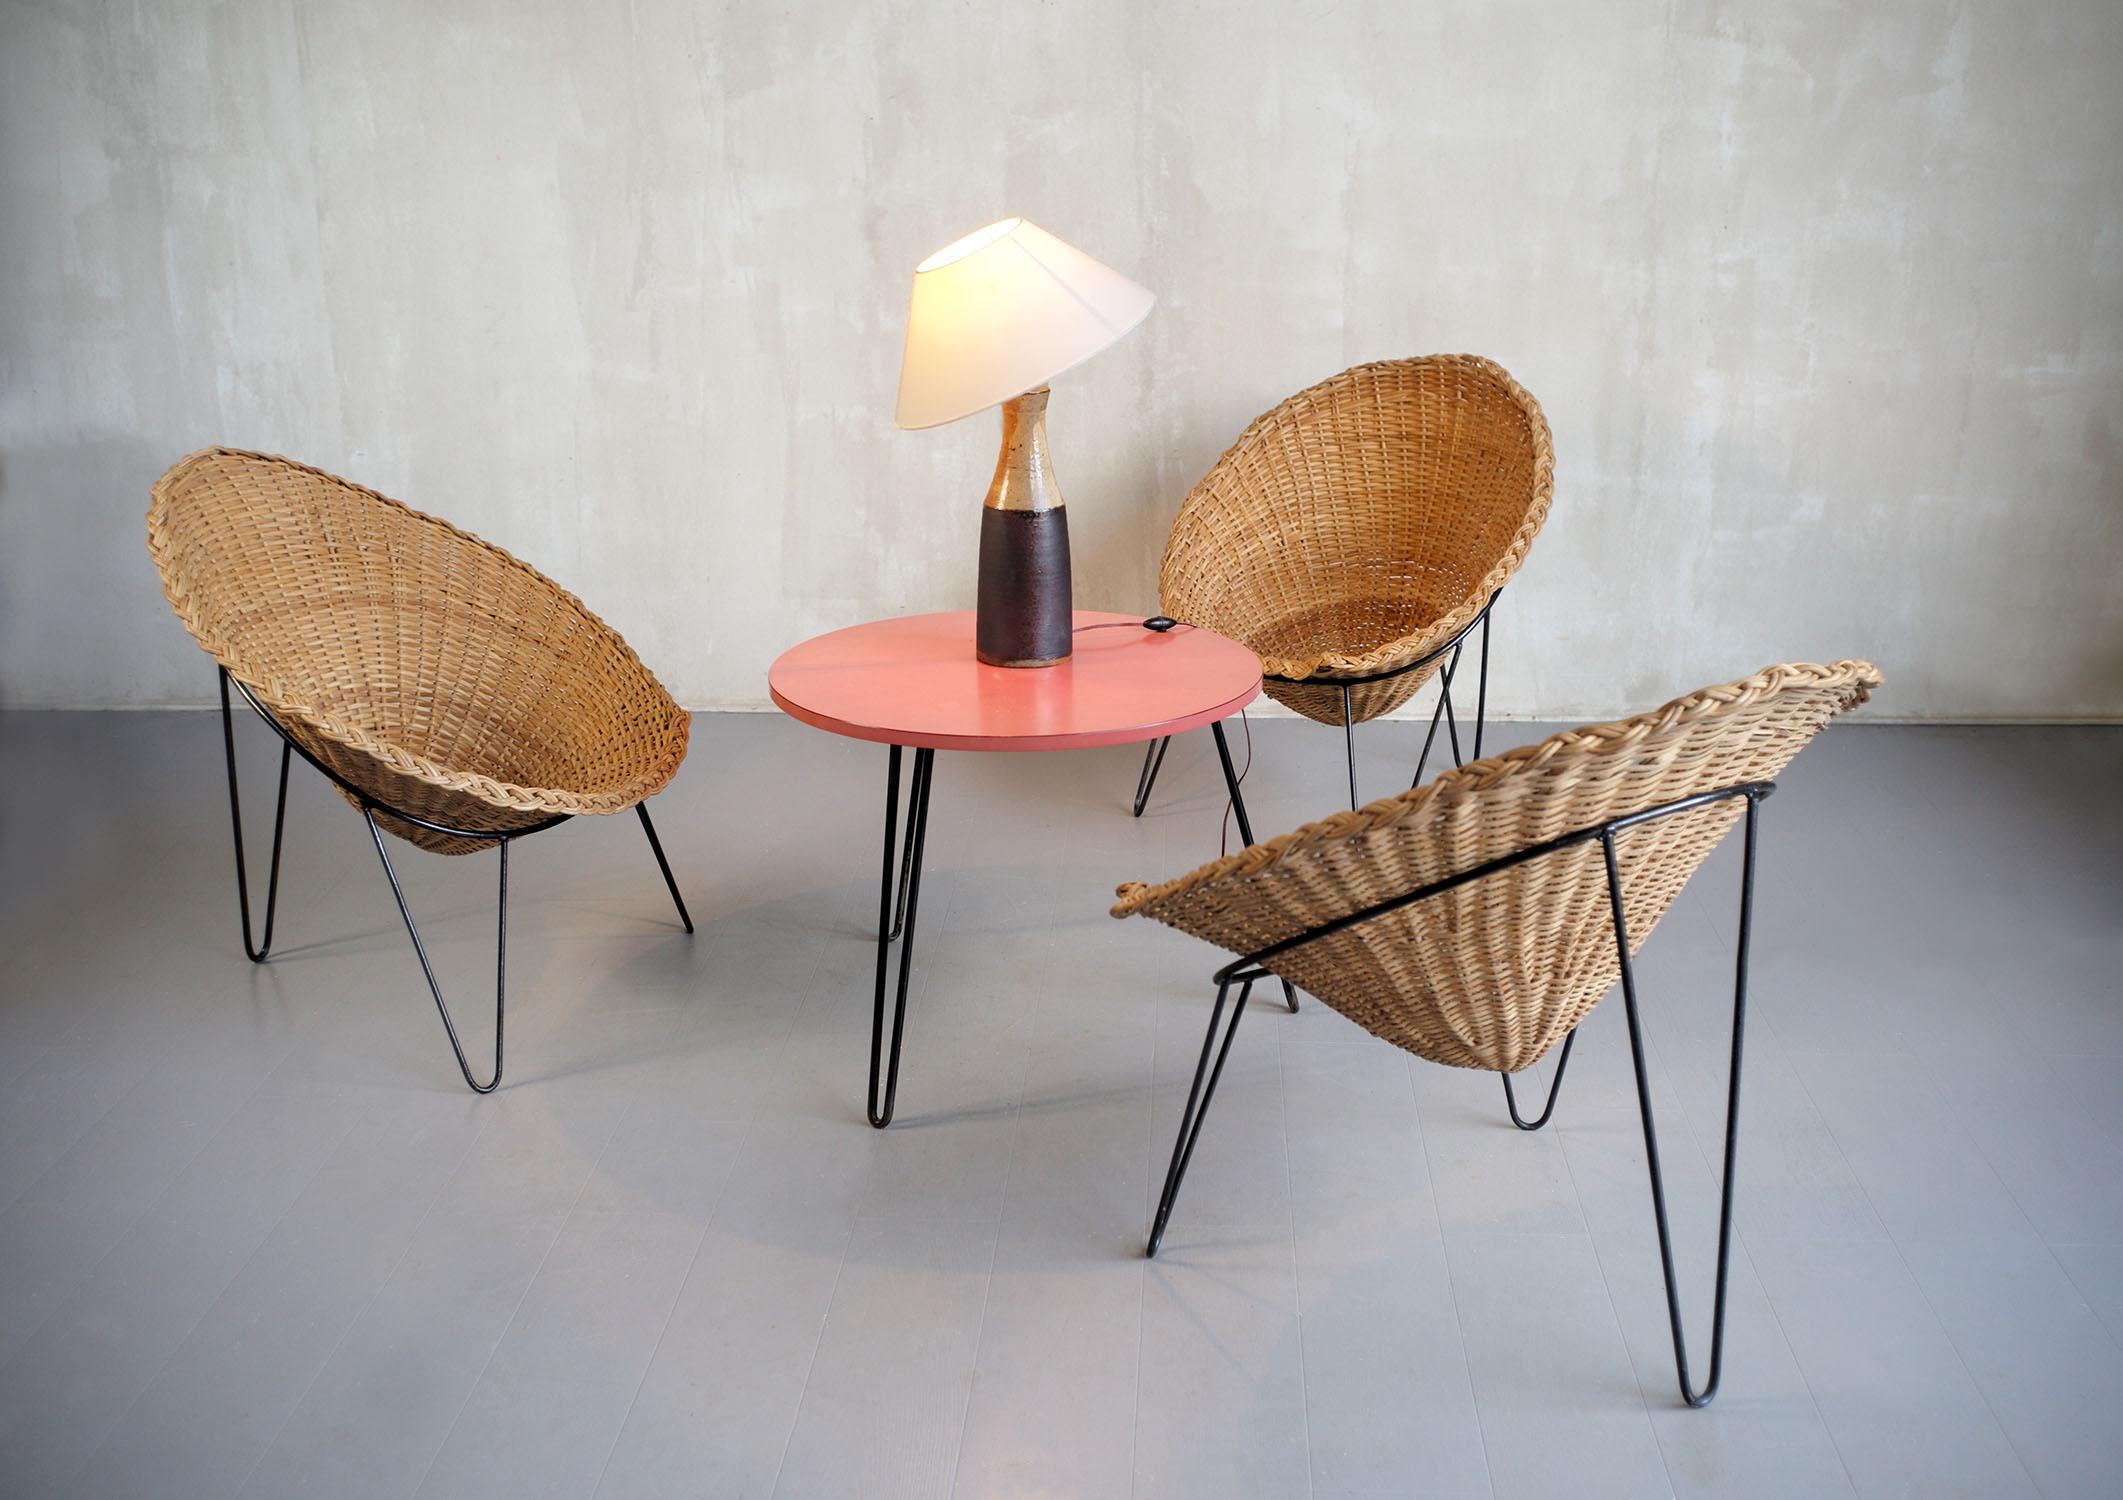 Set of 3 Rattan Armchairs, Italy, 1950 For Sale 3